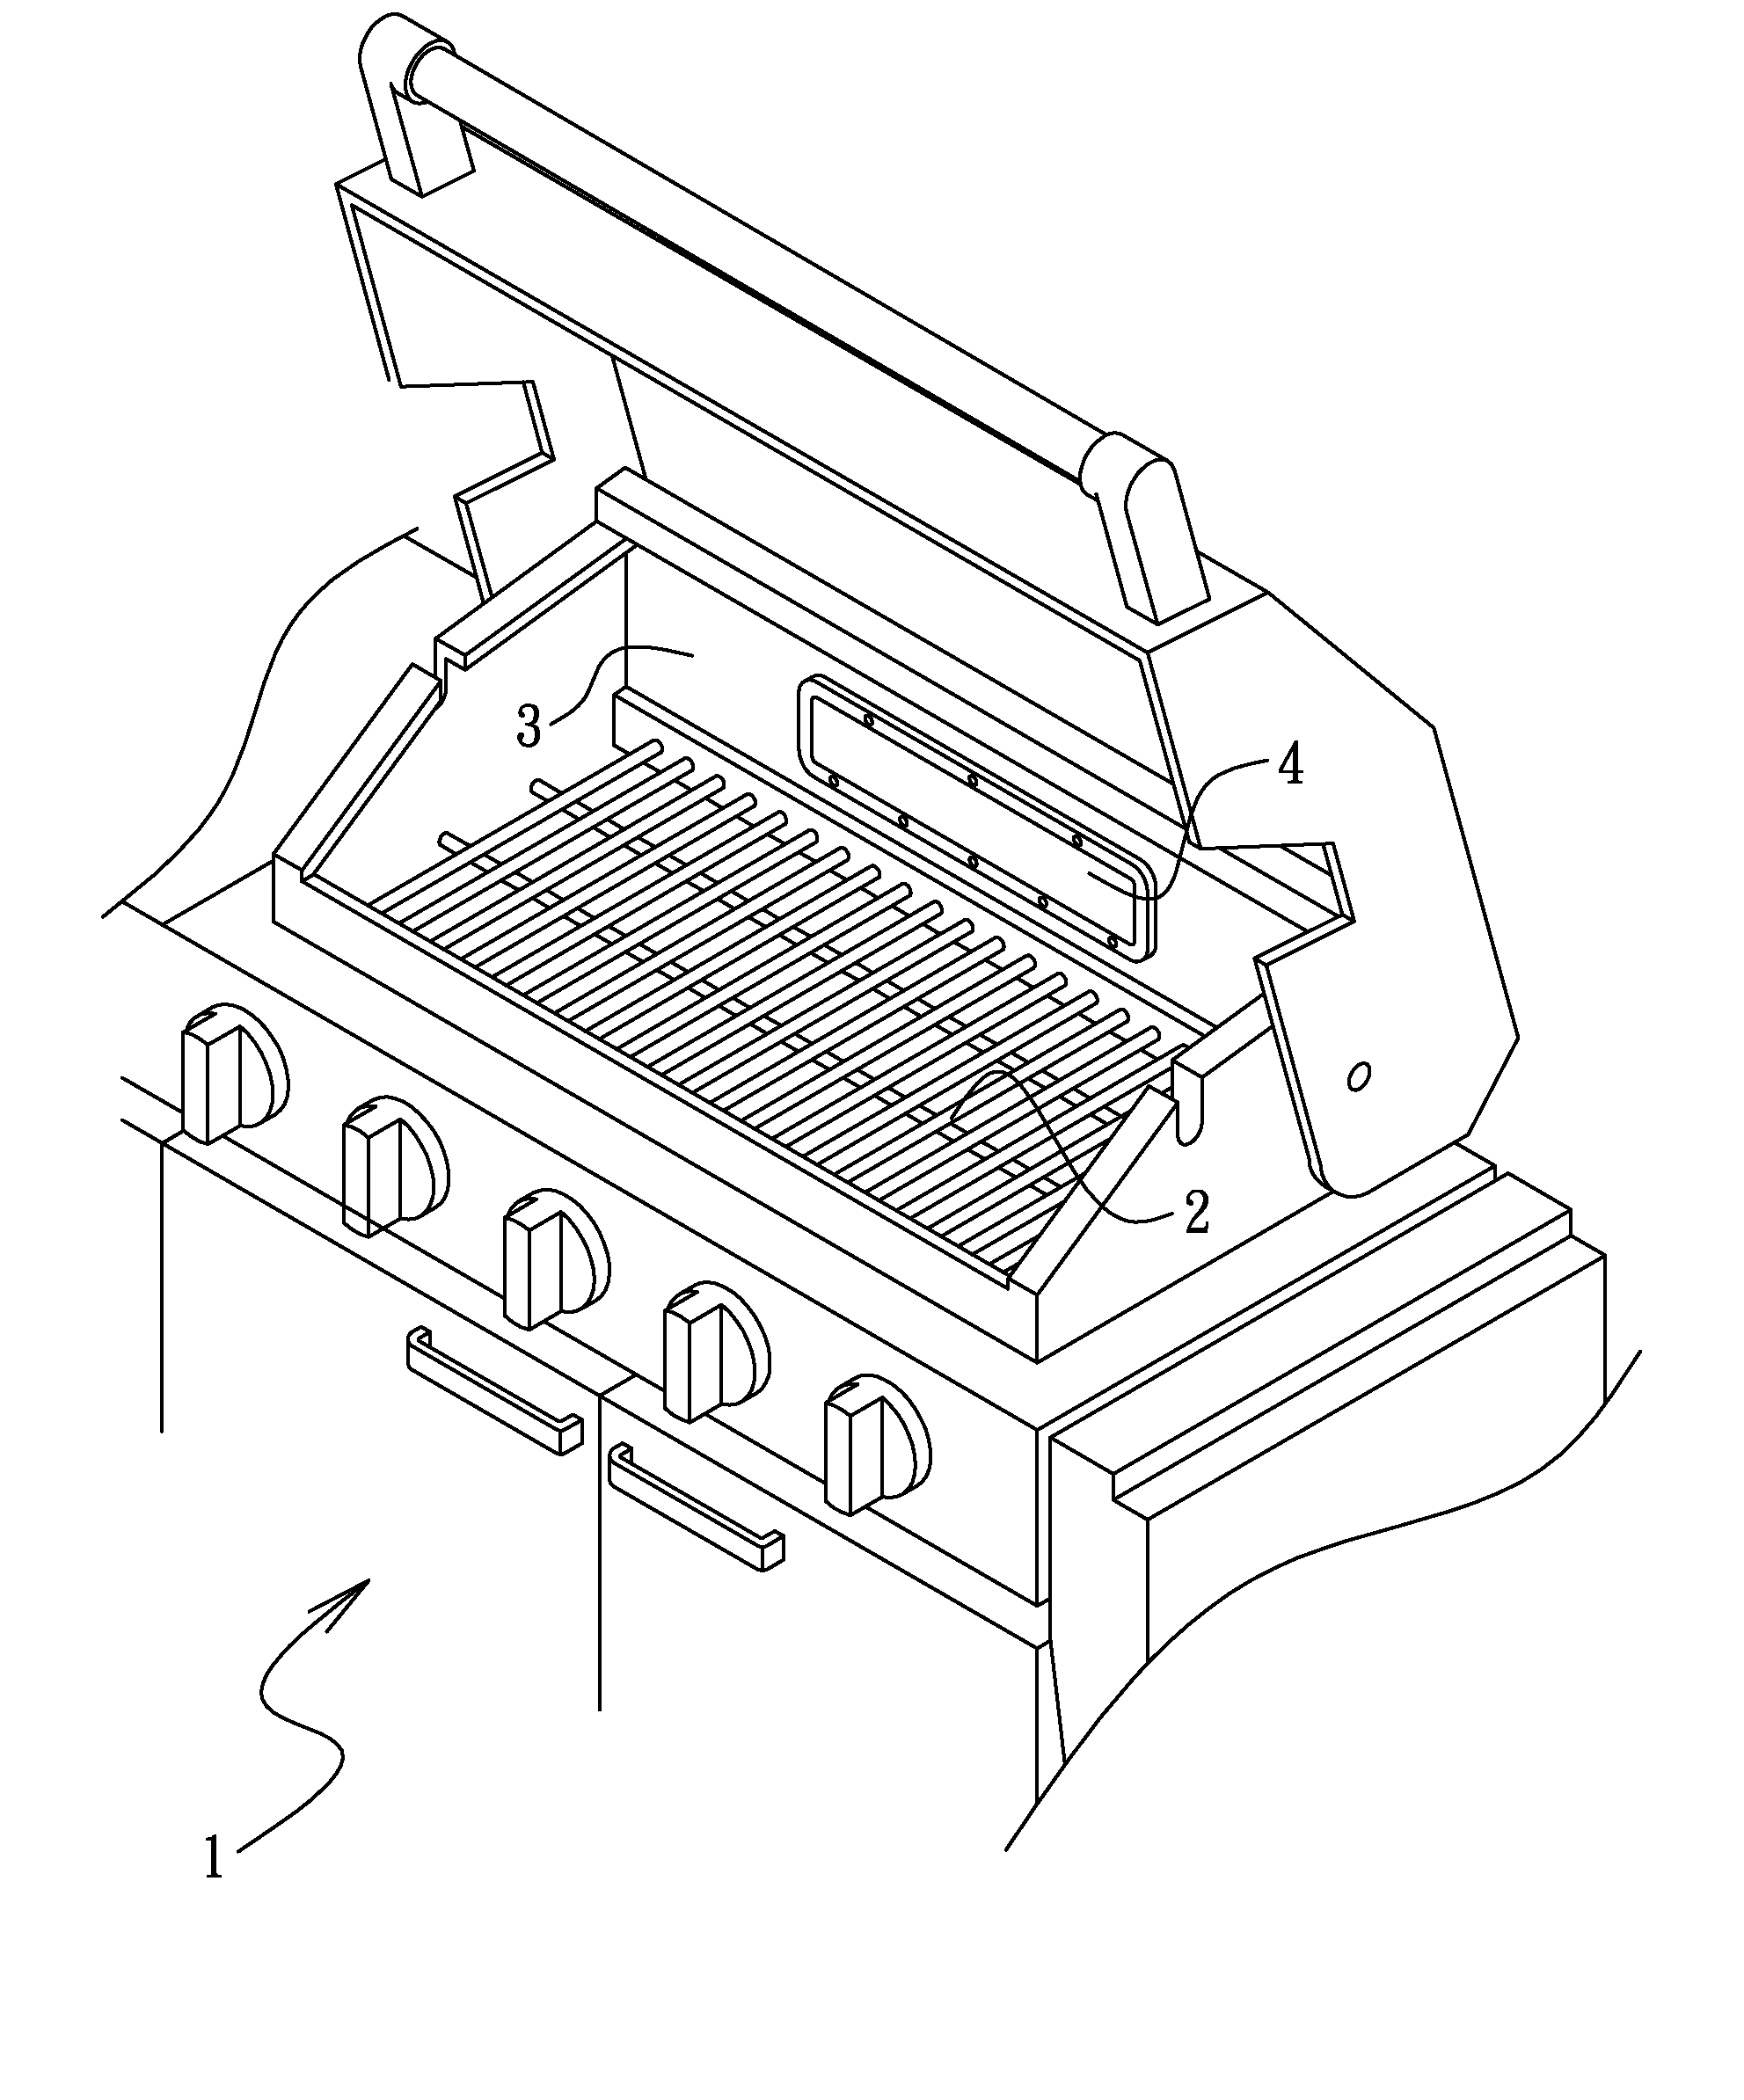 Lighting device for roasting zone of outdoor barbeque table